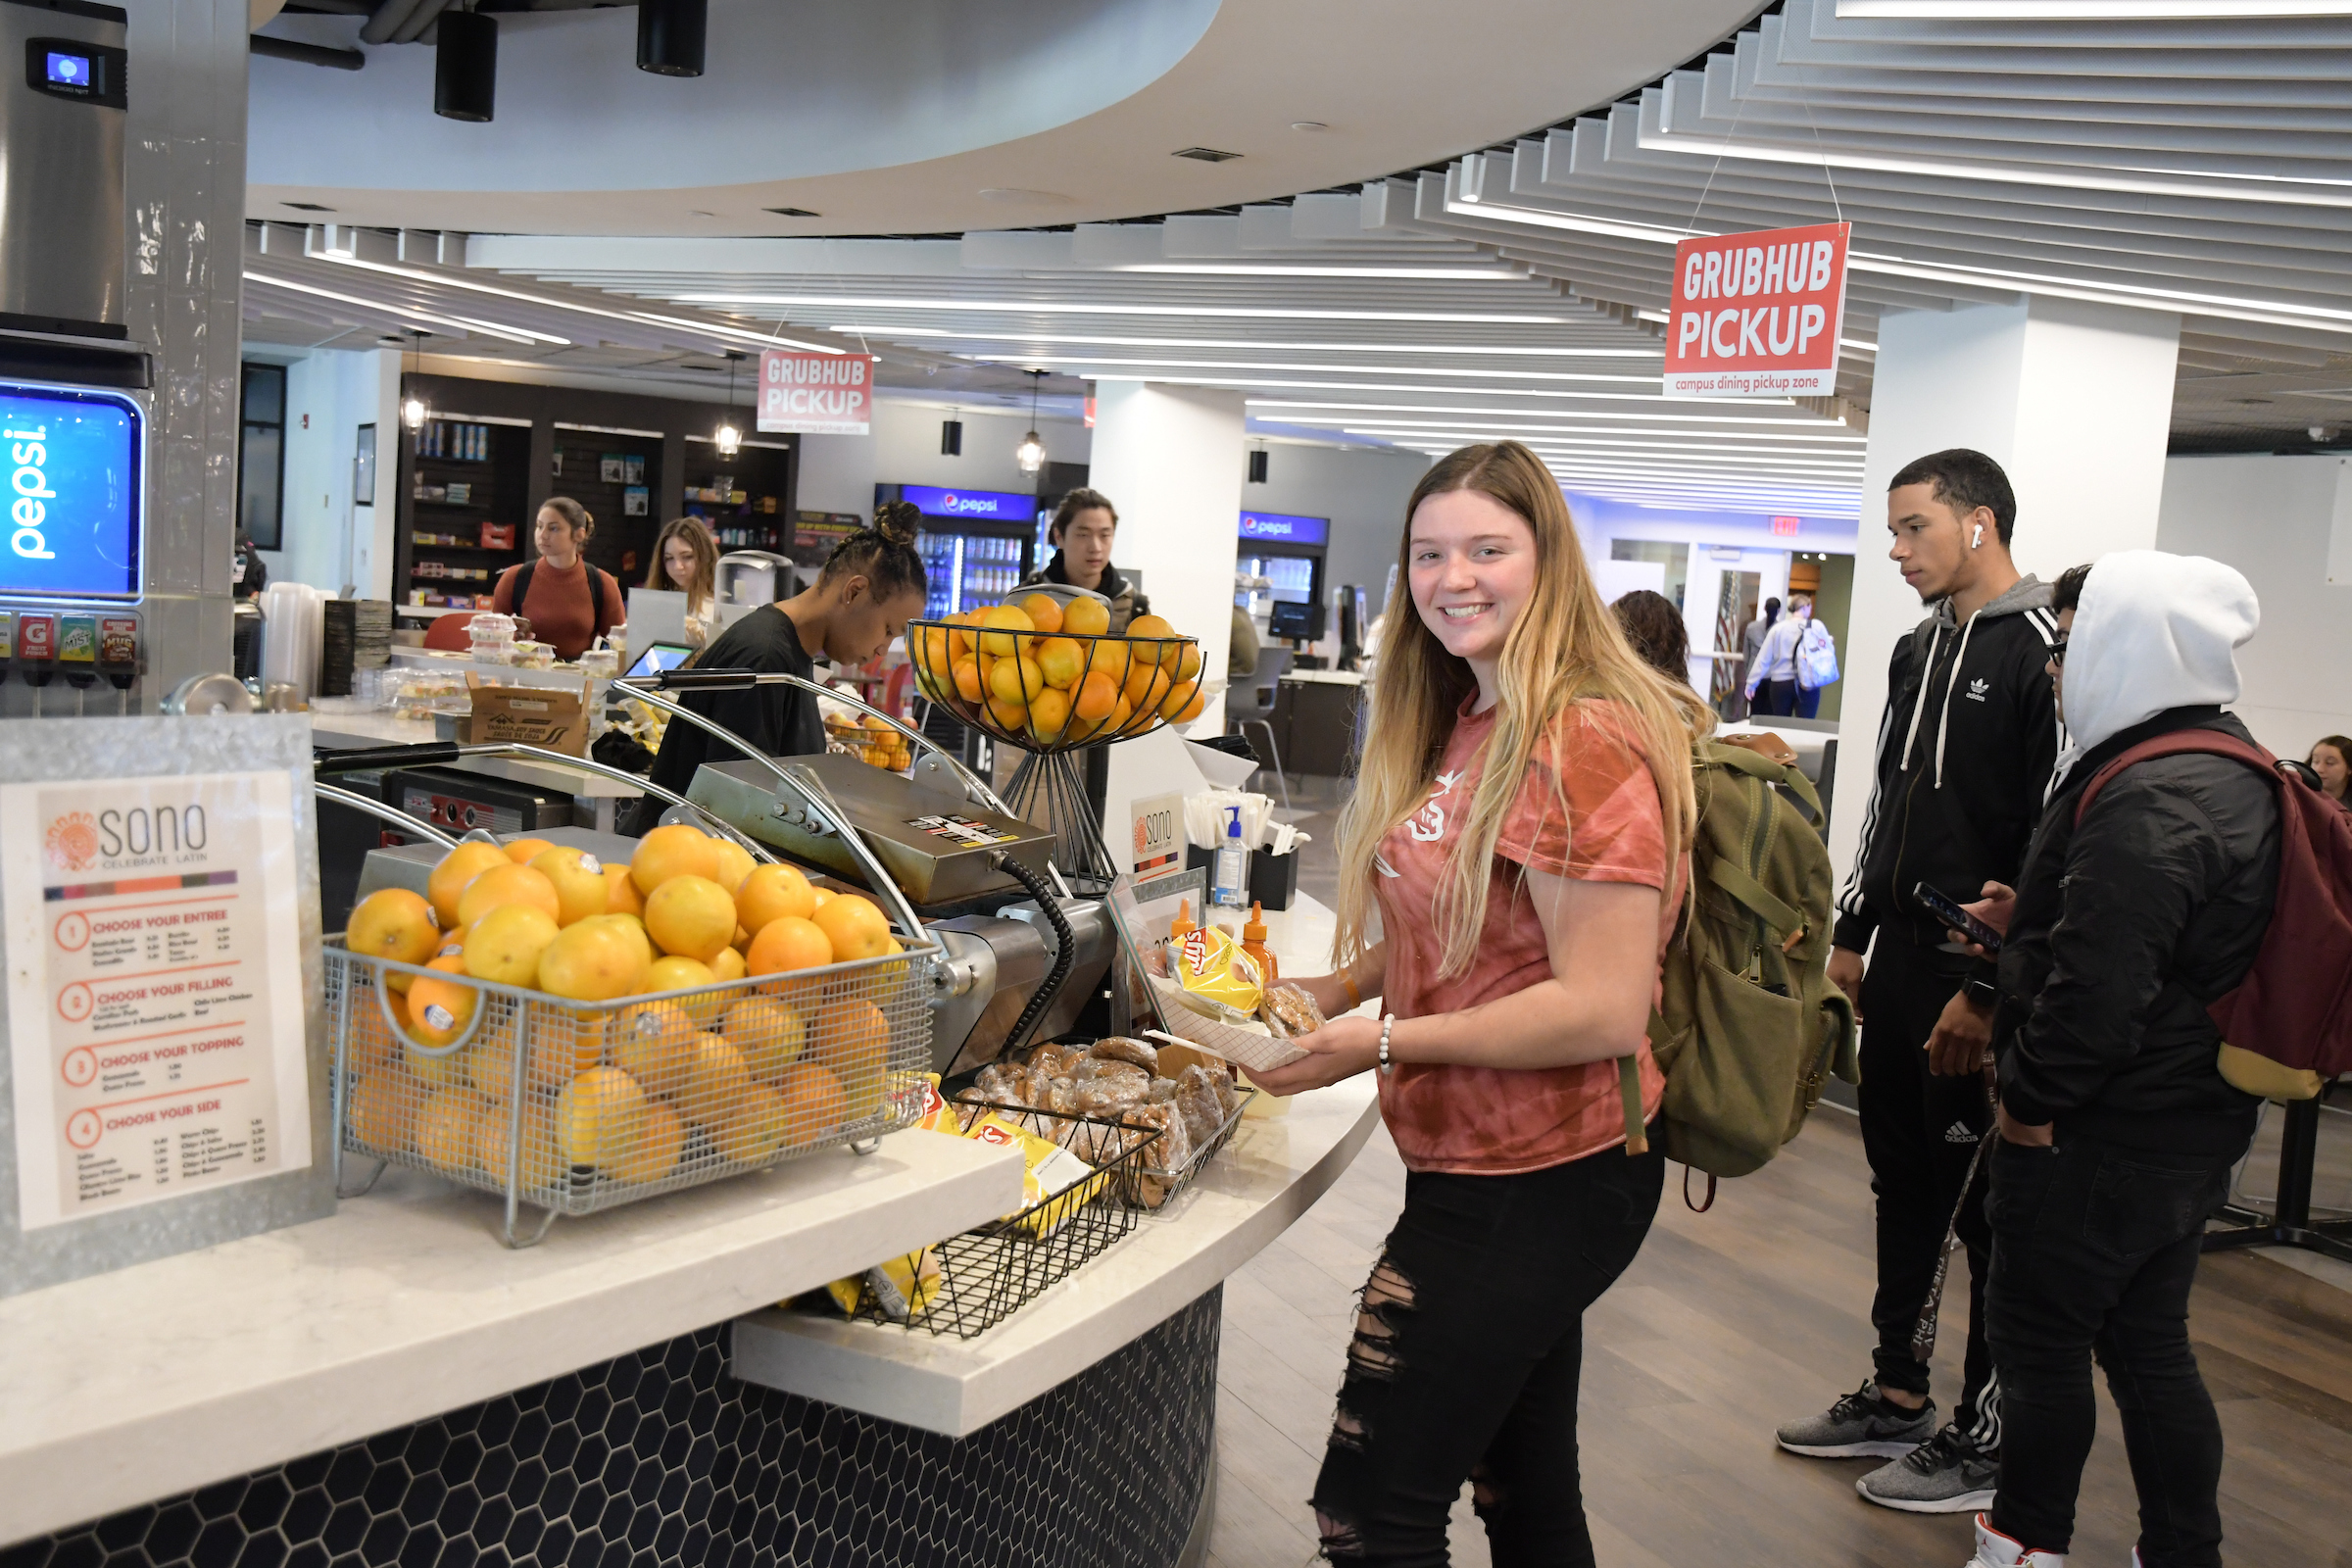 Students pick up grab-and-go meals